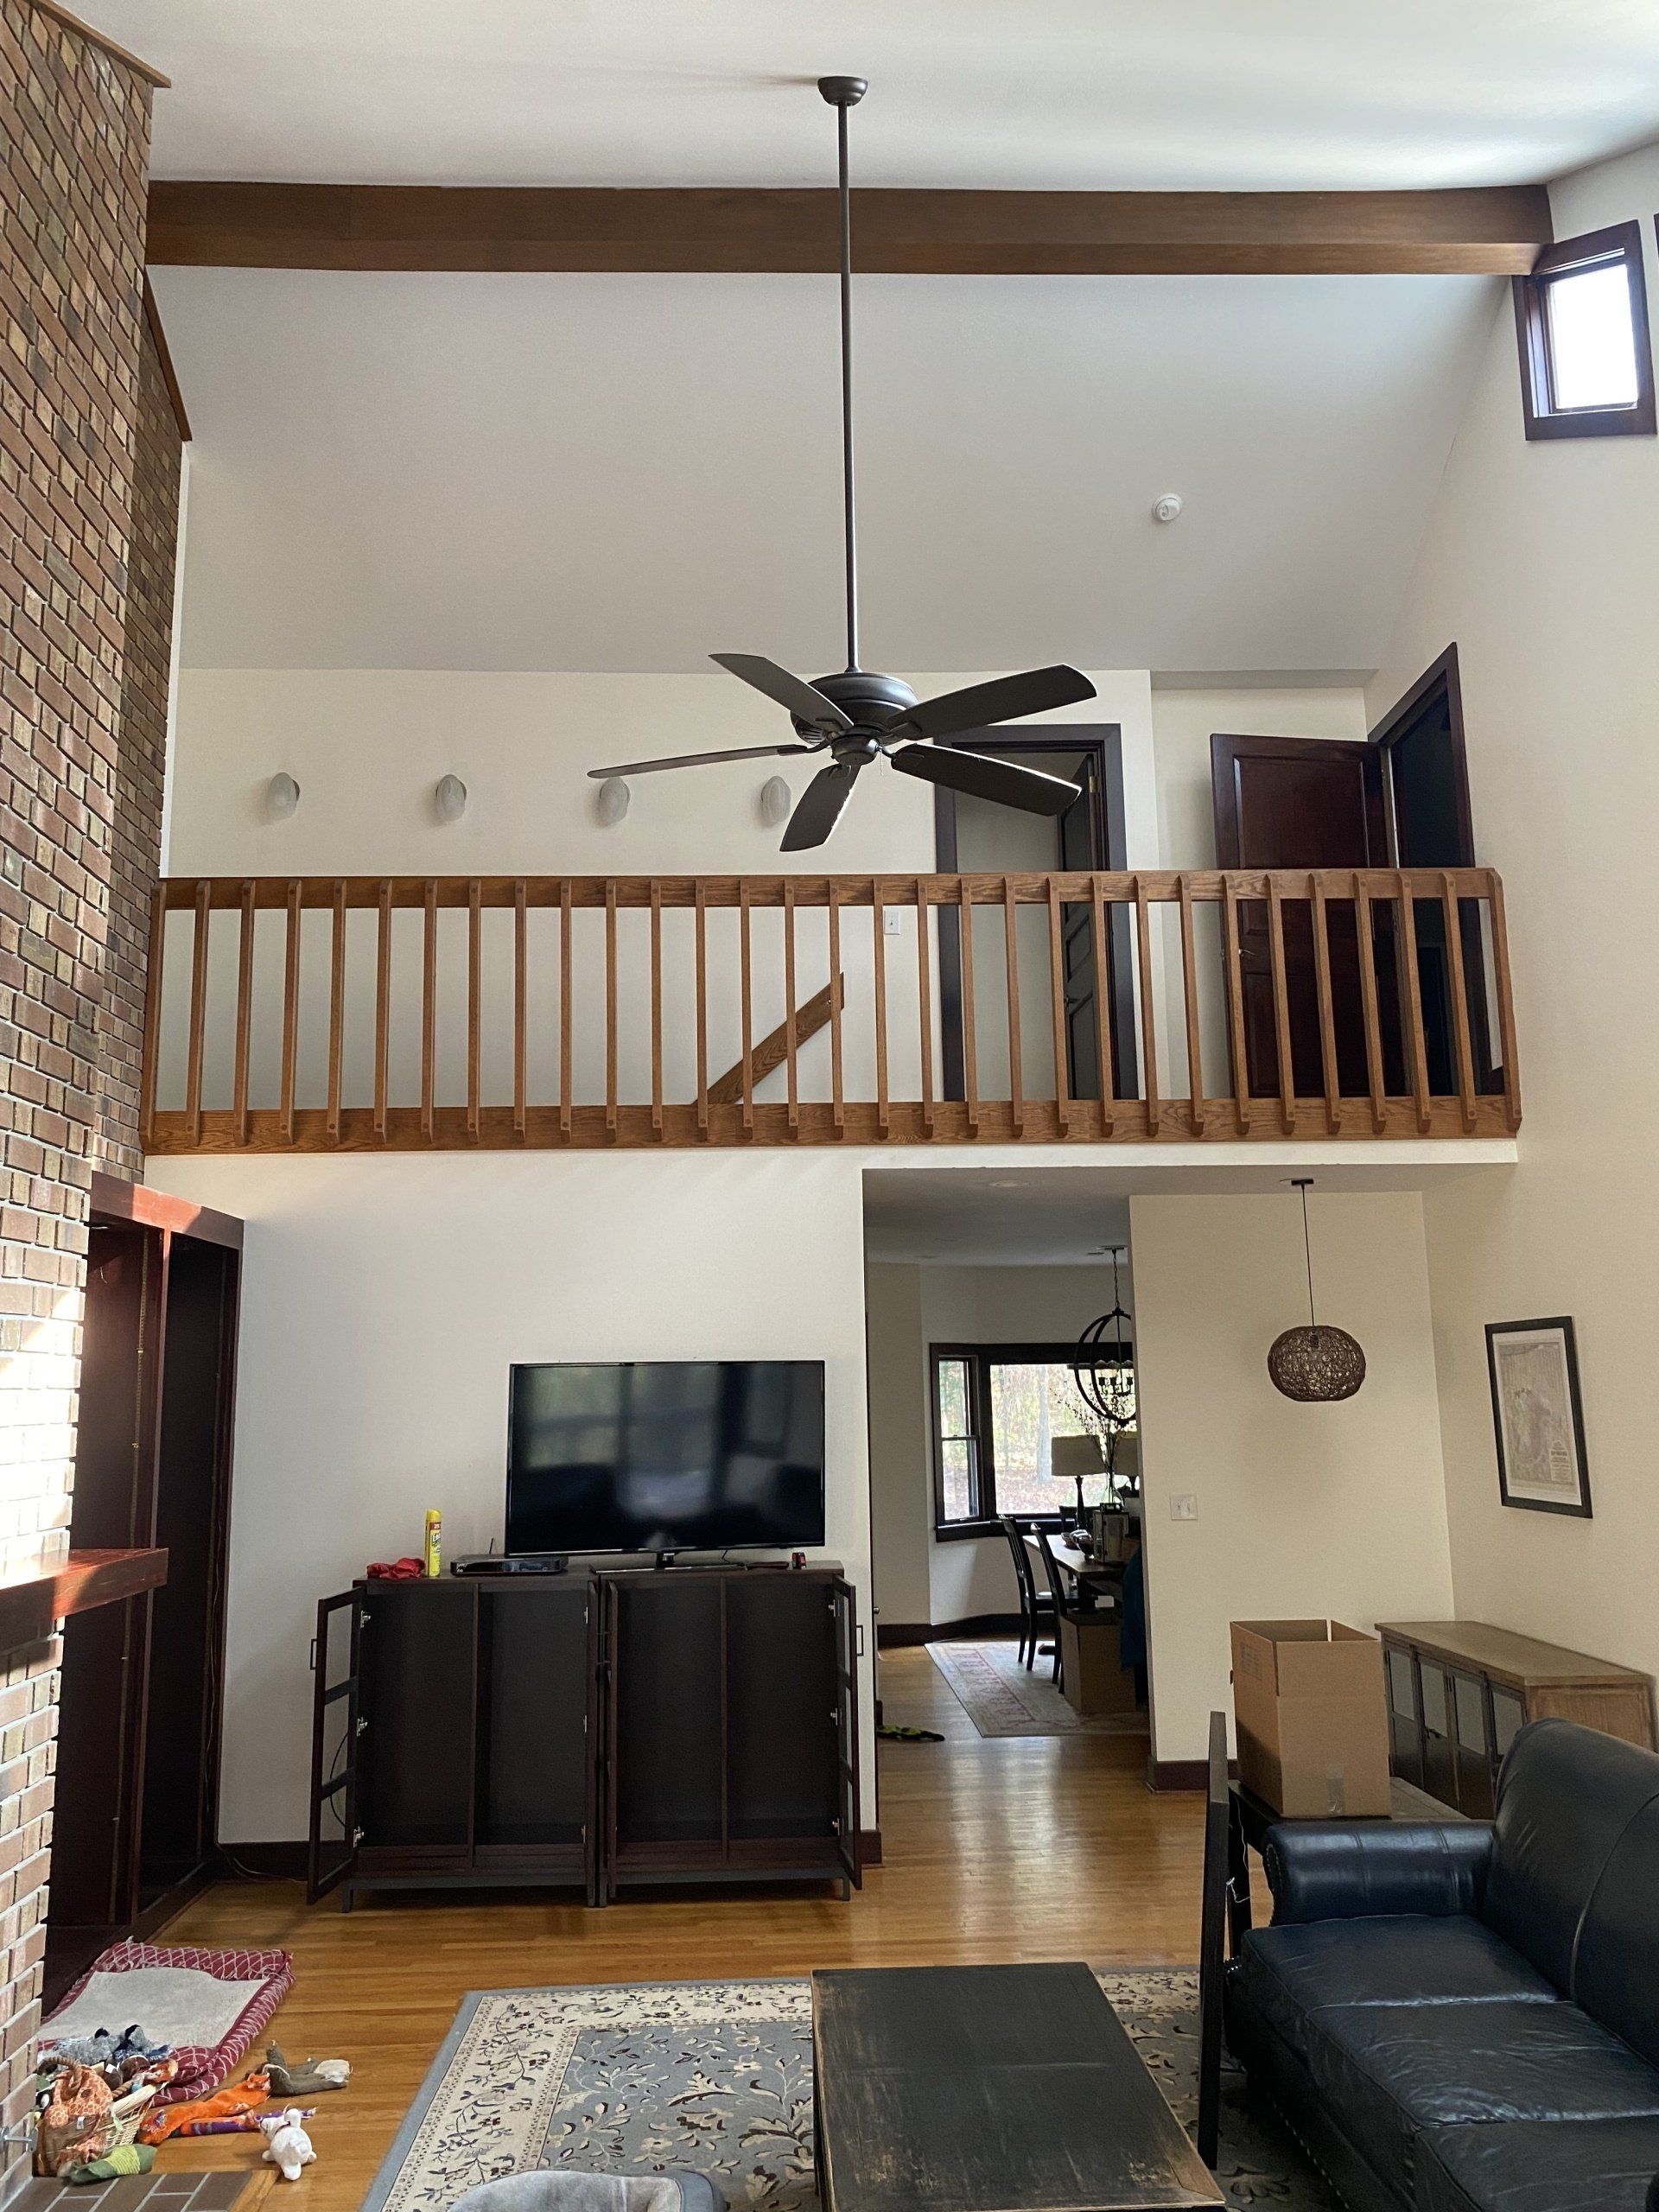 outdated wooden railing and light fixture